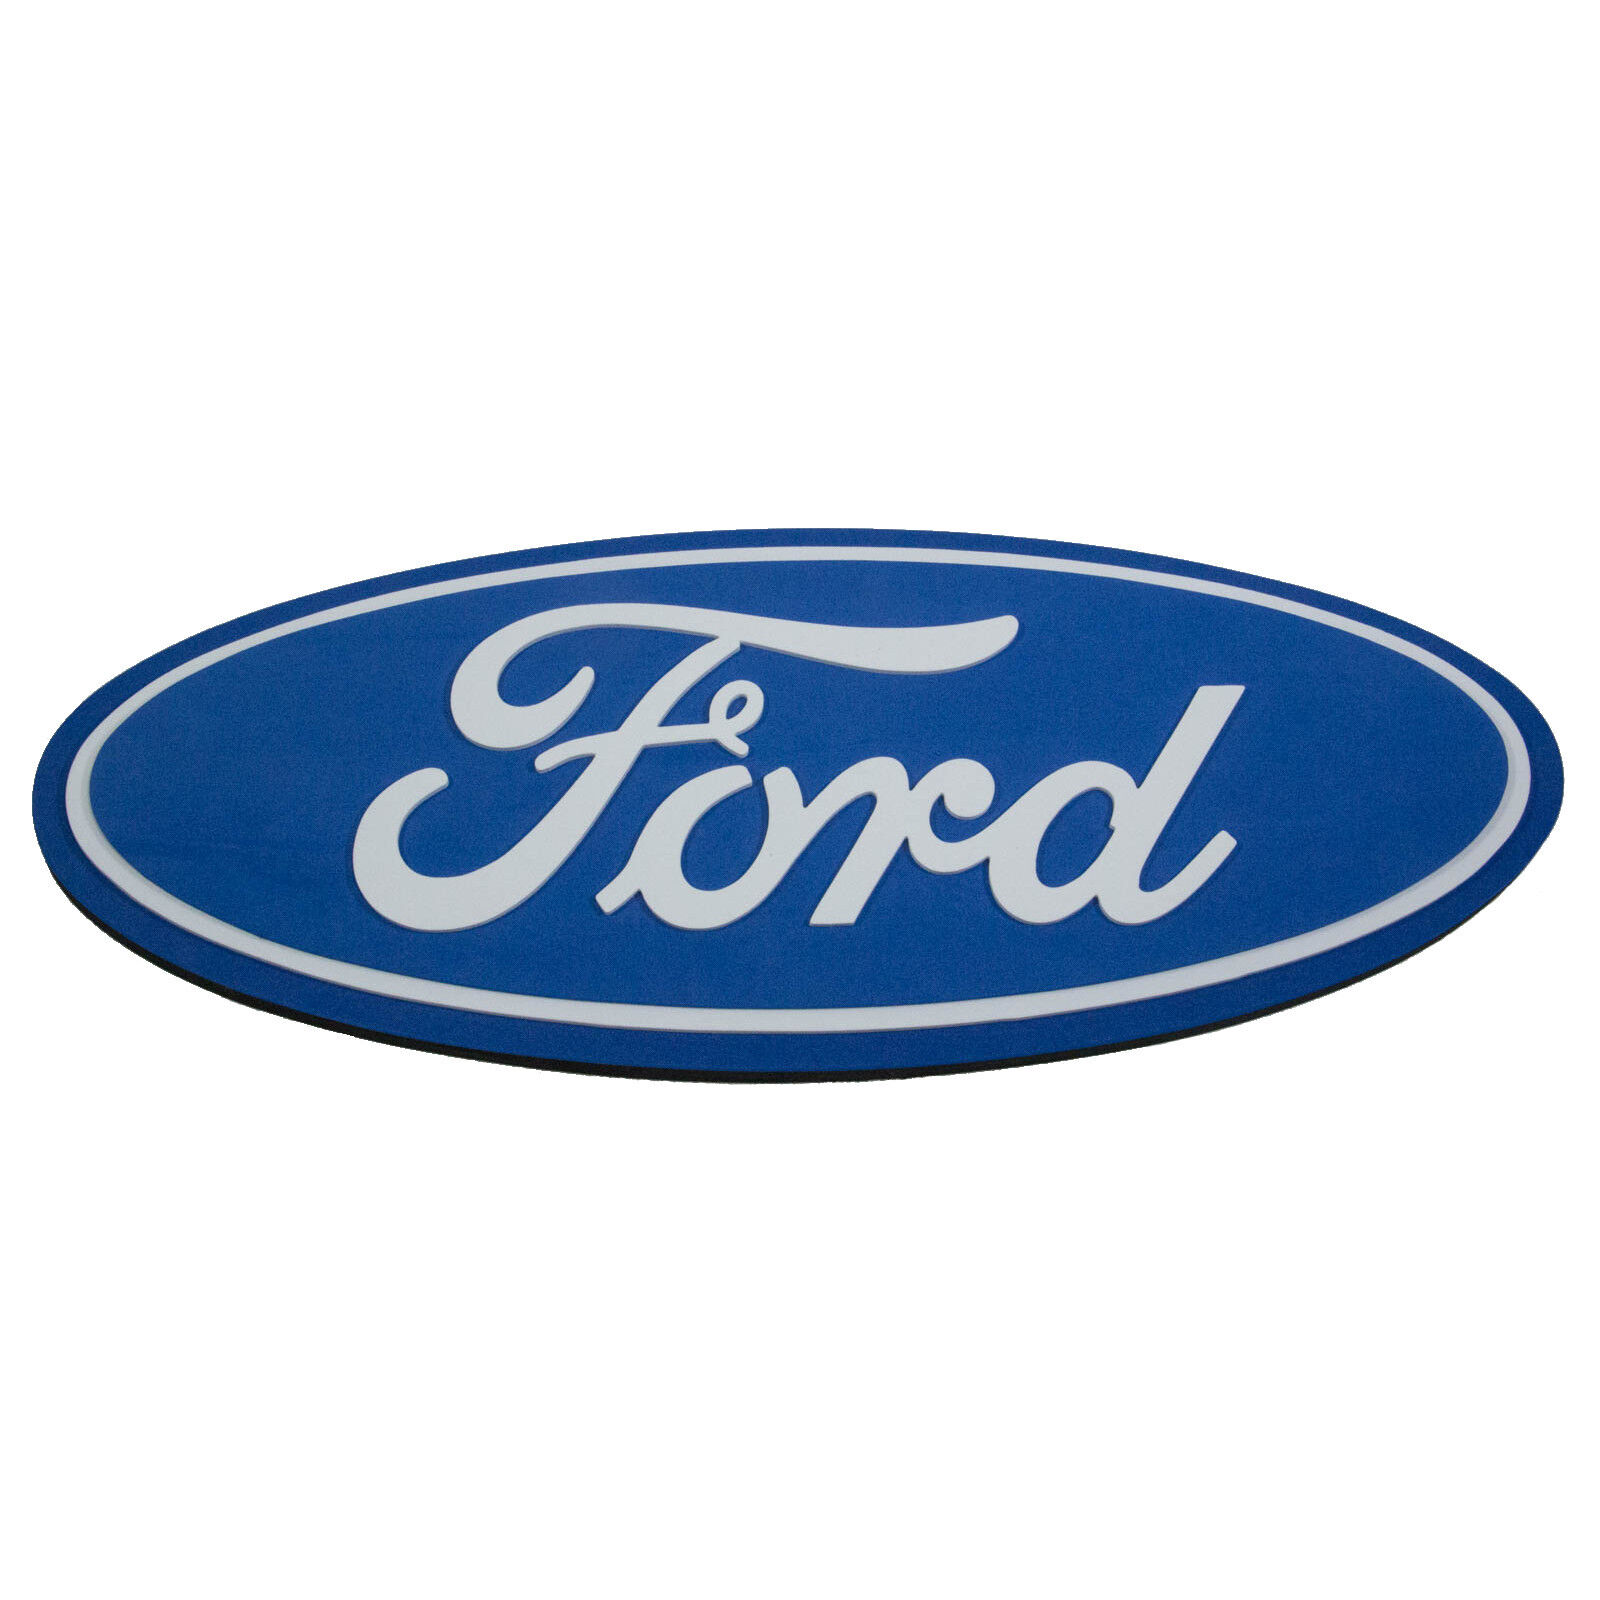 NEW OEM Ford 3D Foam Wall Garage Sign Mustang F150 Raptor RS Banner Advertising 